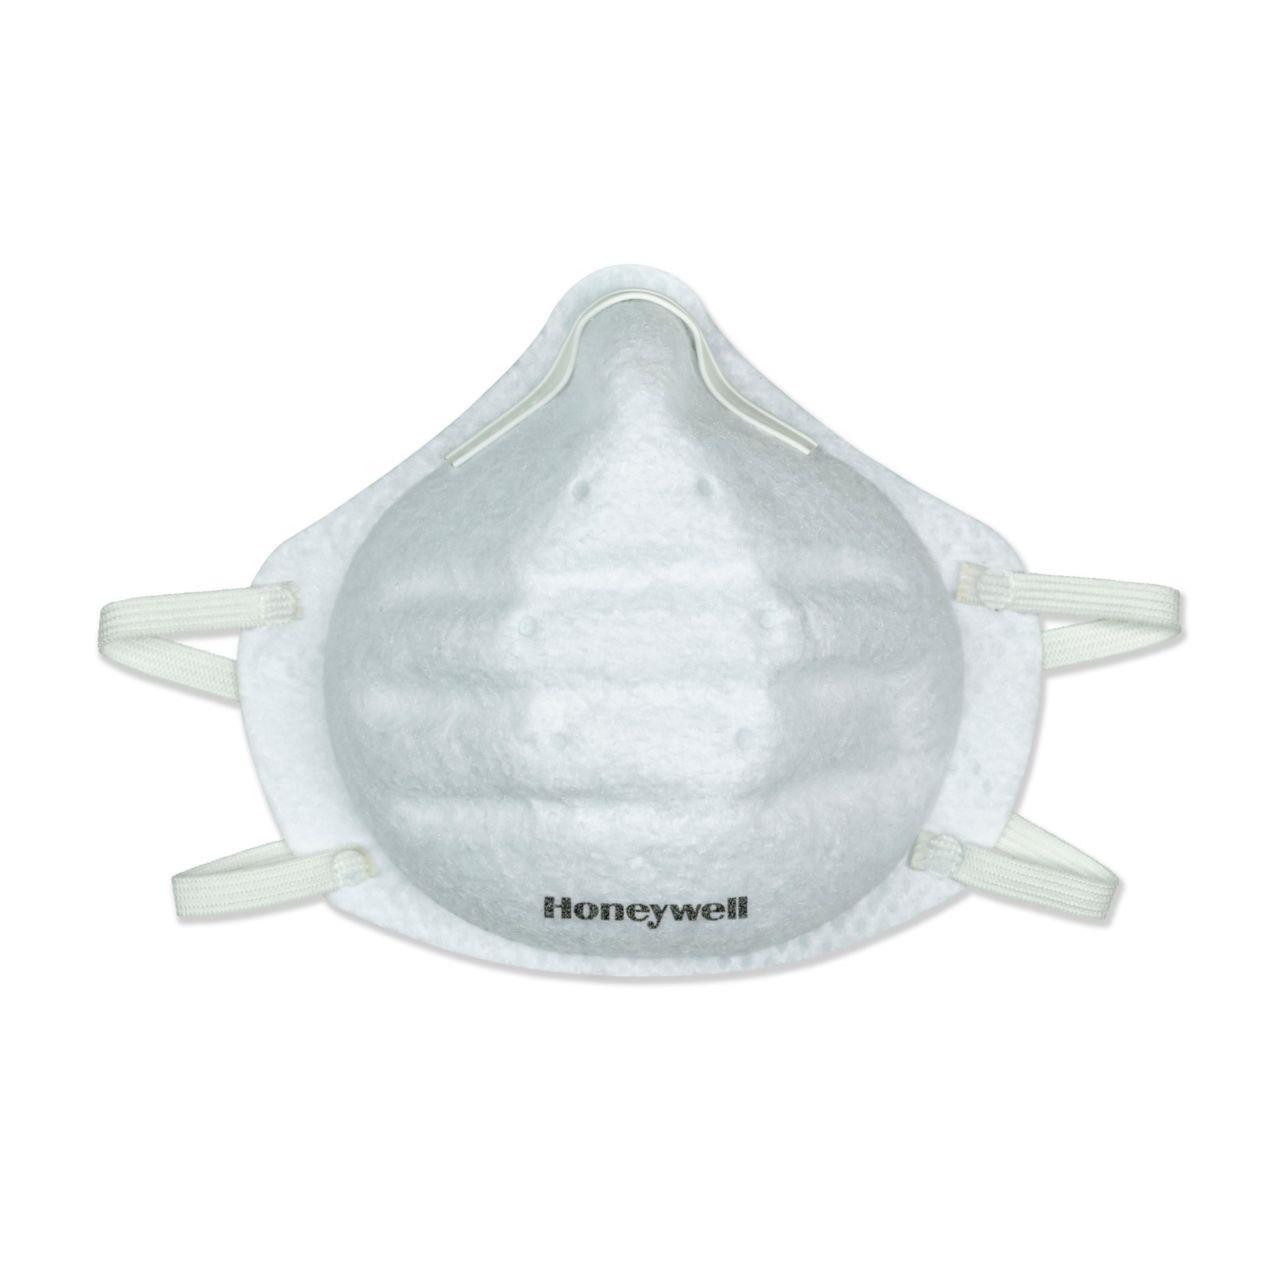 N95 Particulate Respirator with Nose Clip